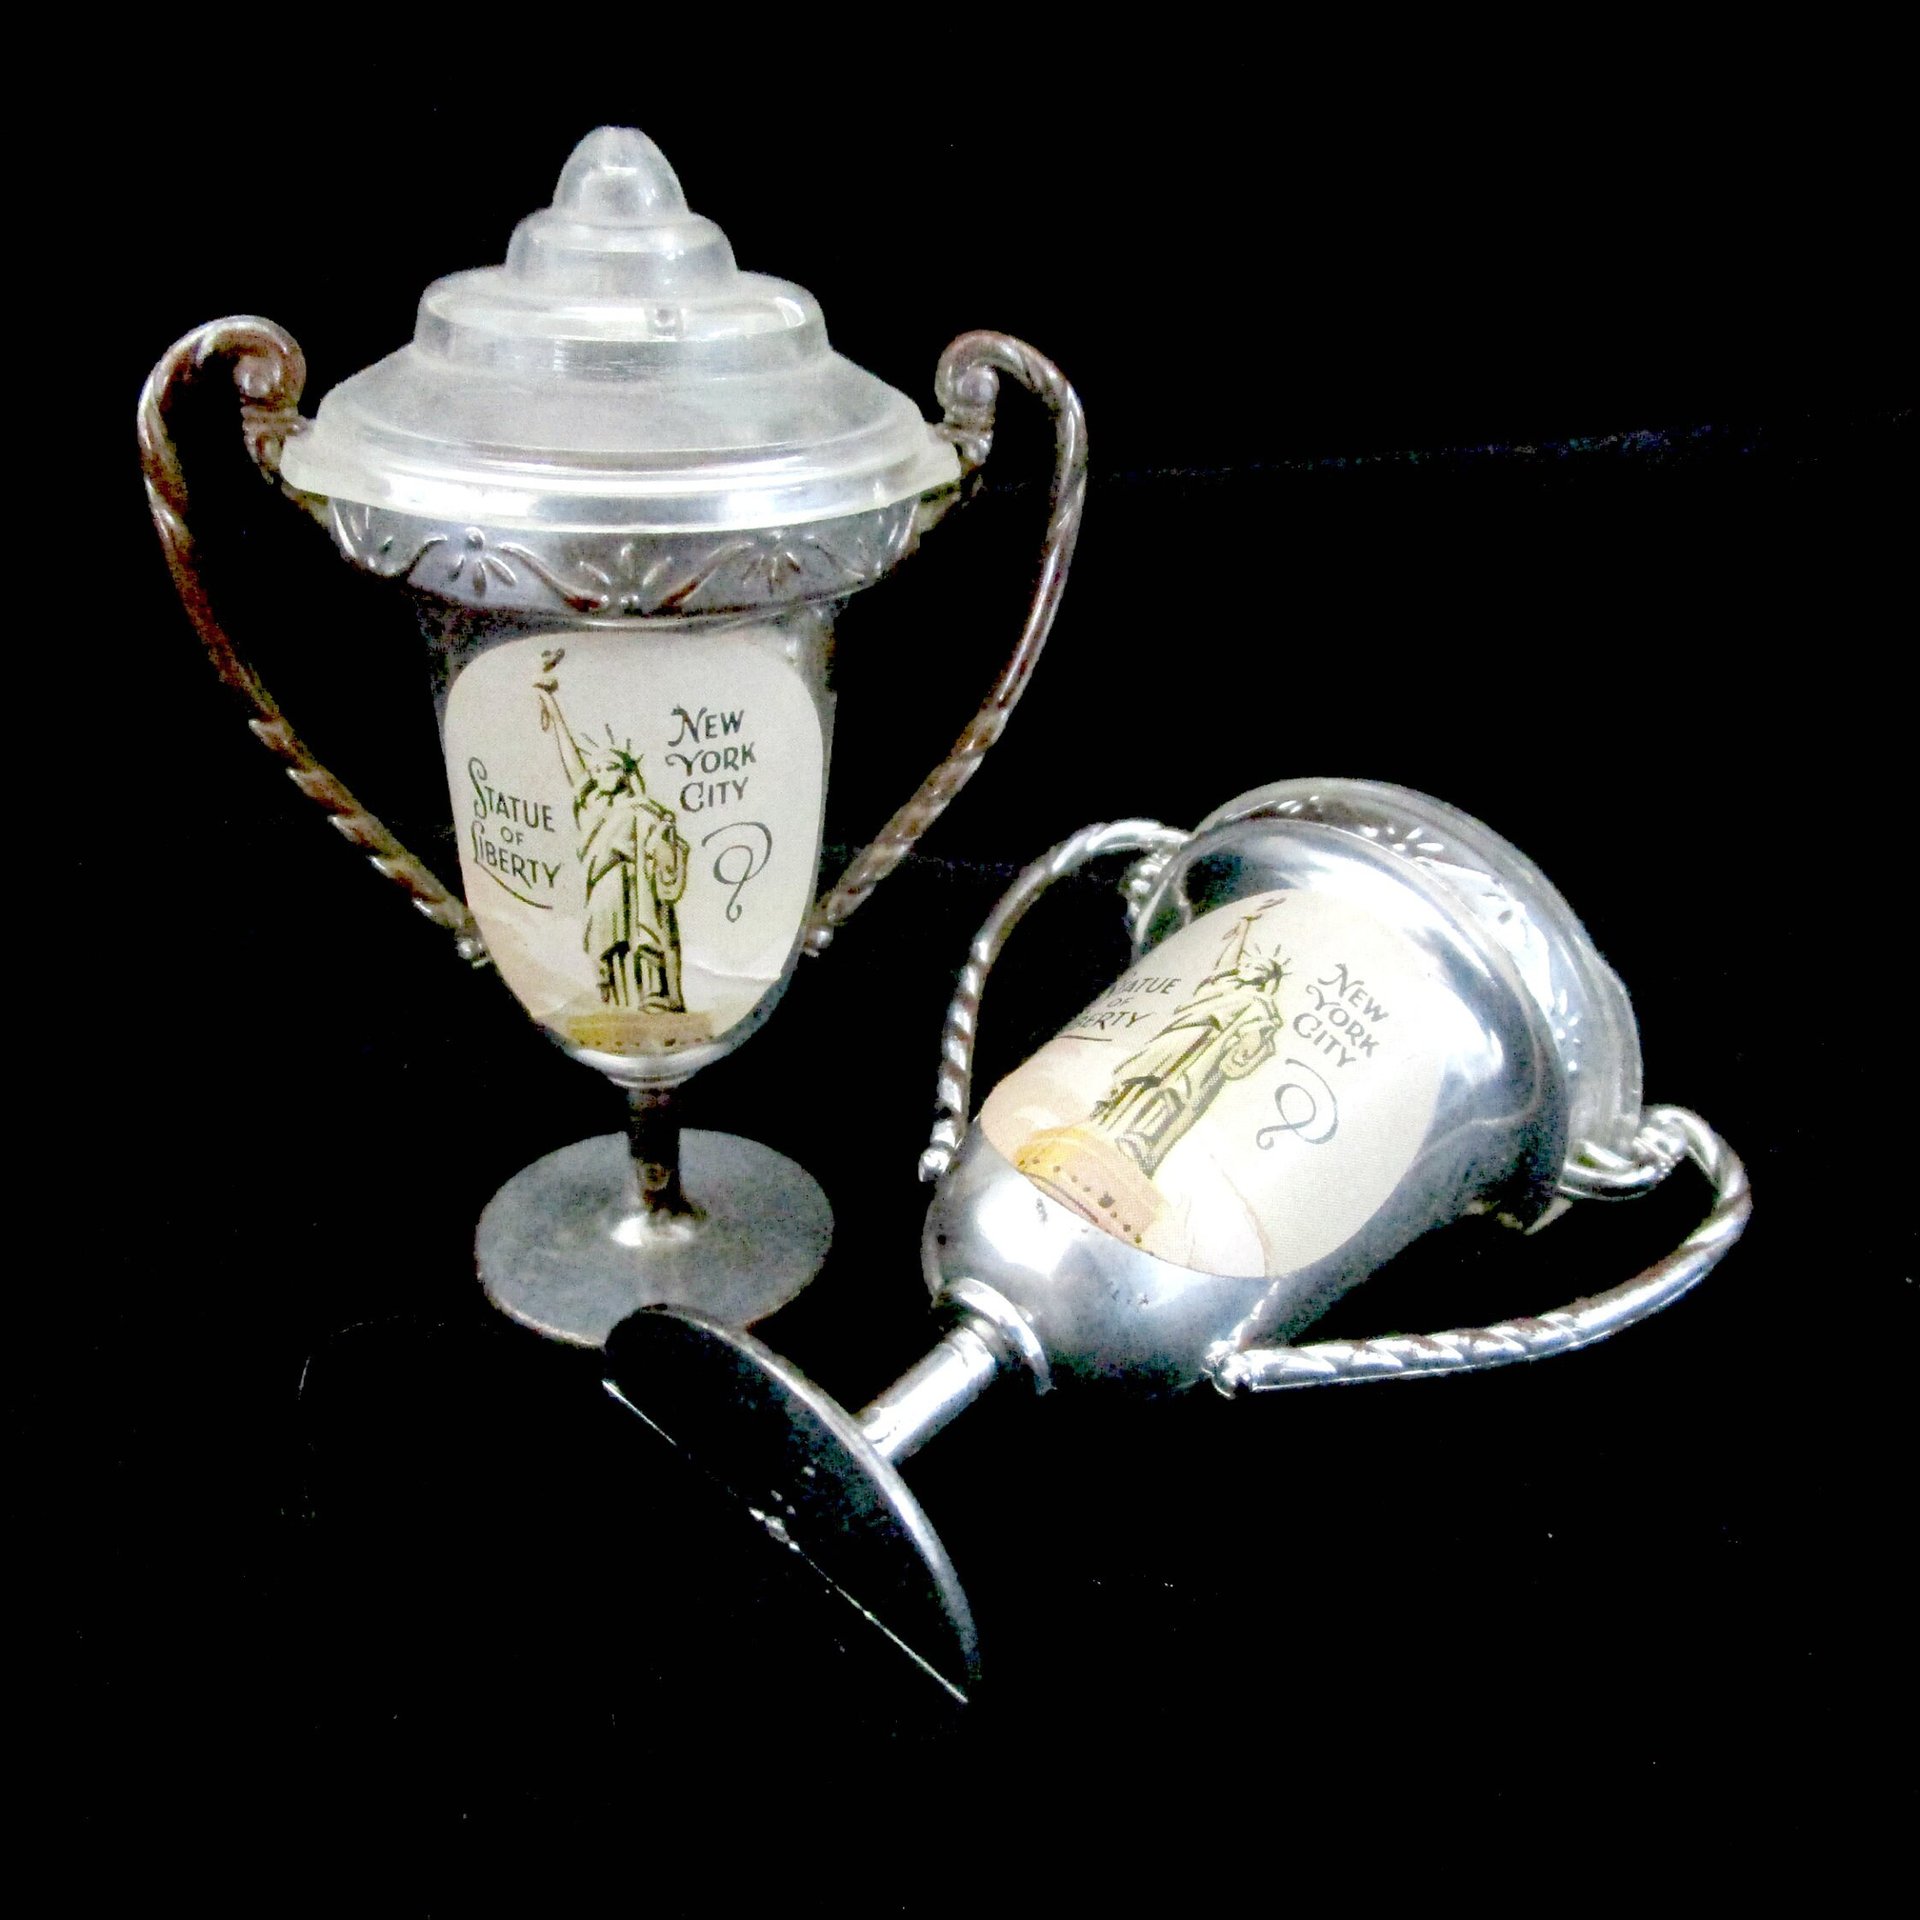 New York City, Salt and Pepper Shakers, Statue of Liberty,  New York Souvenir,  Silver Loving Cup Shakers, 1930s, Make Offer